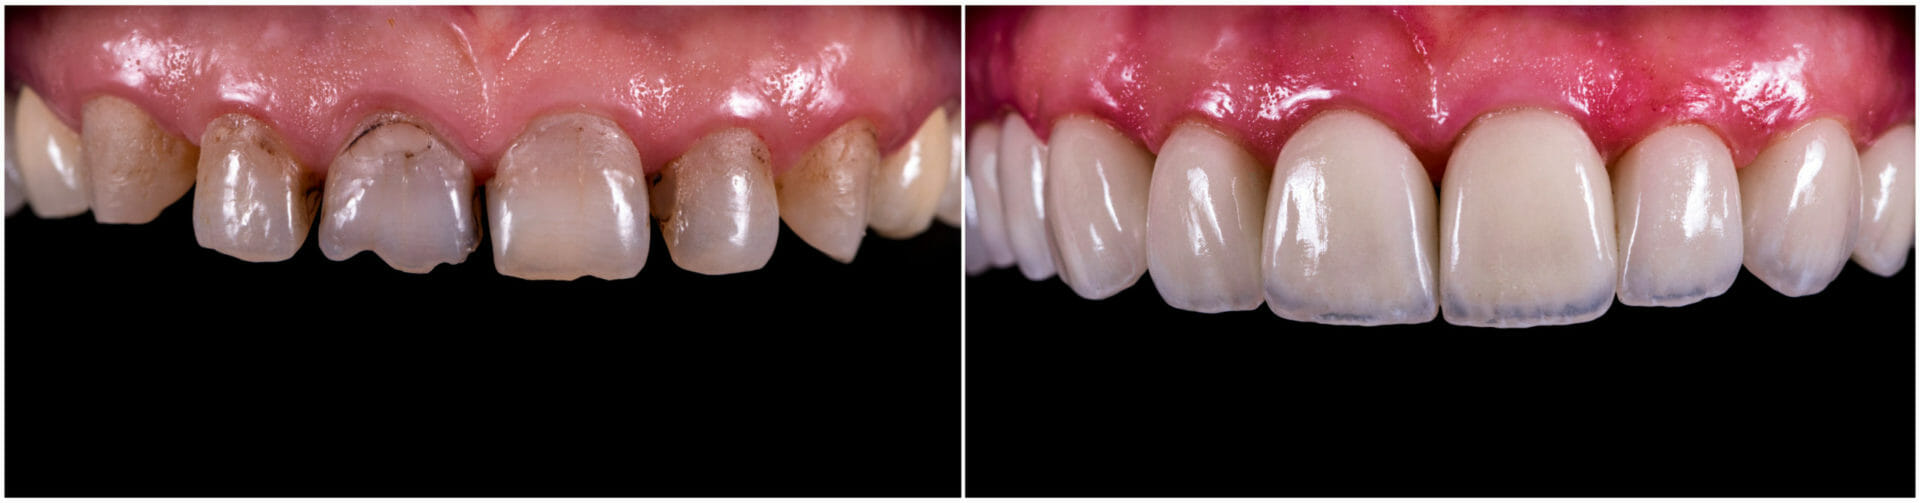 Before and After Dental Crowns